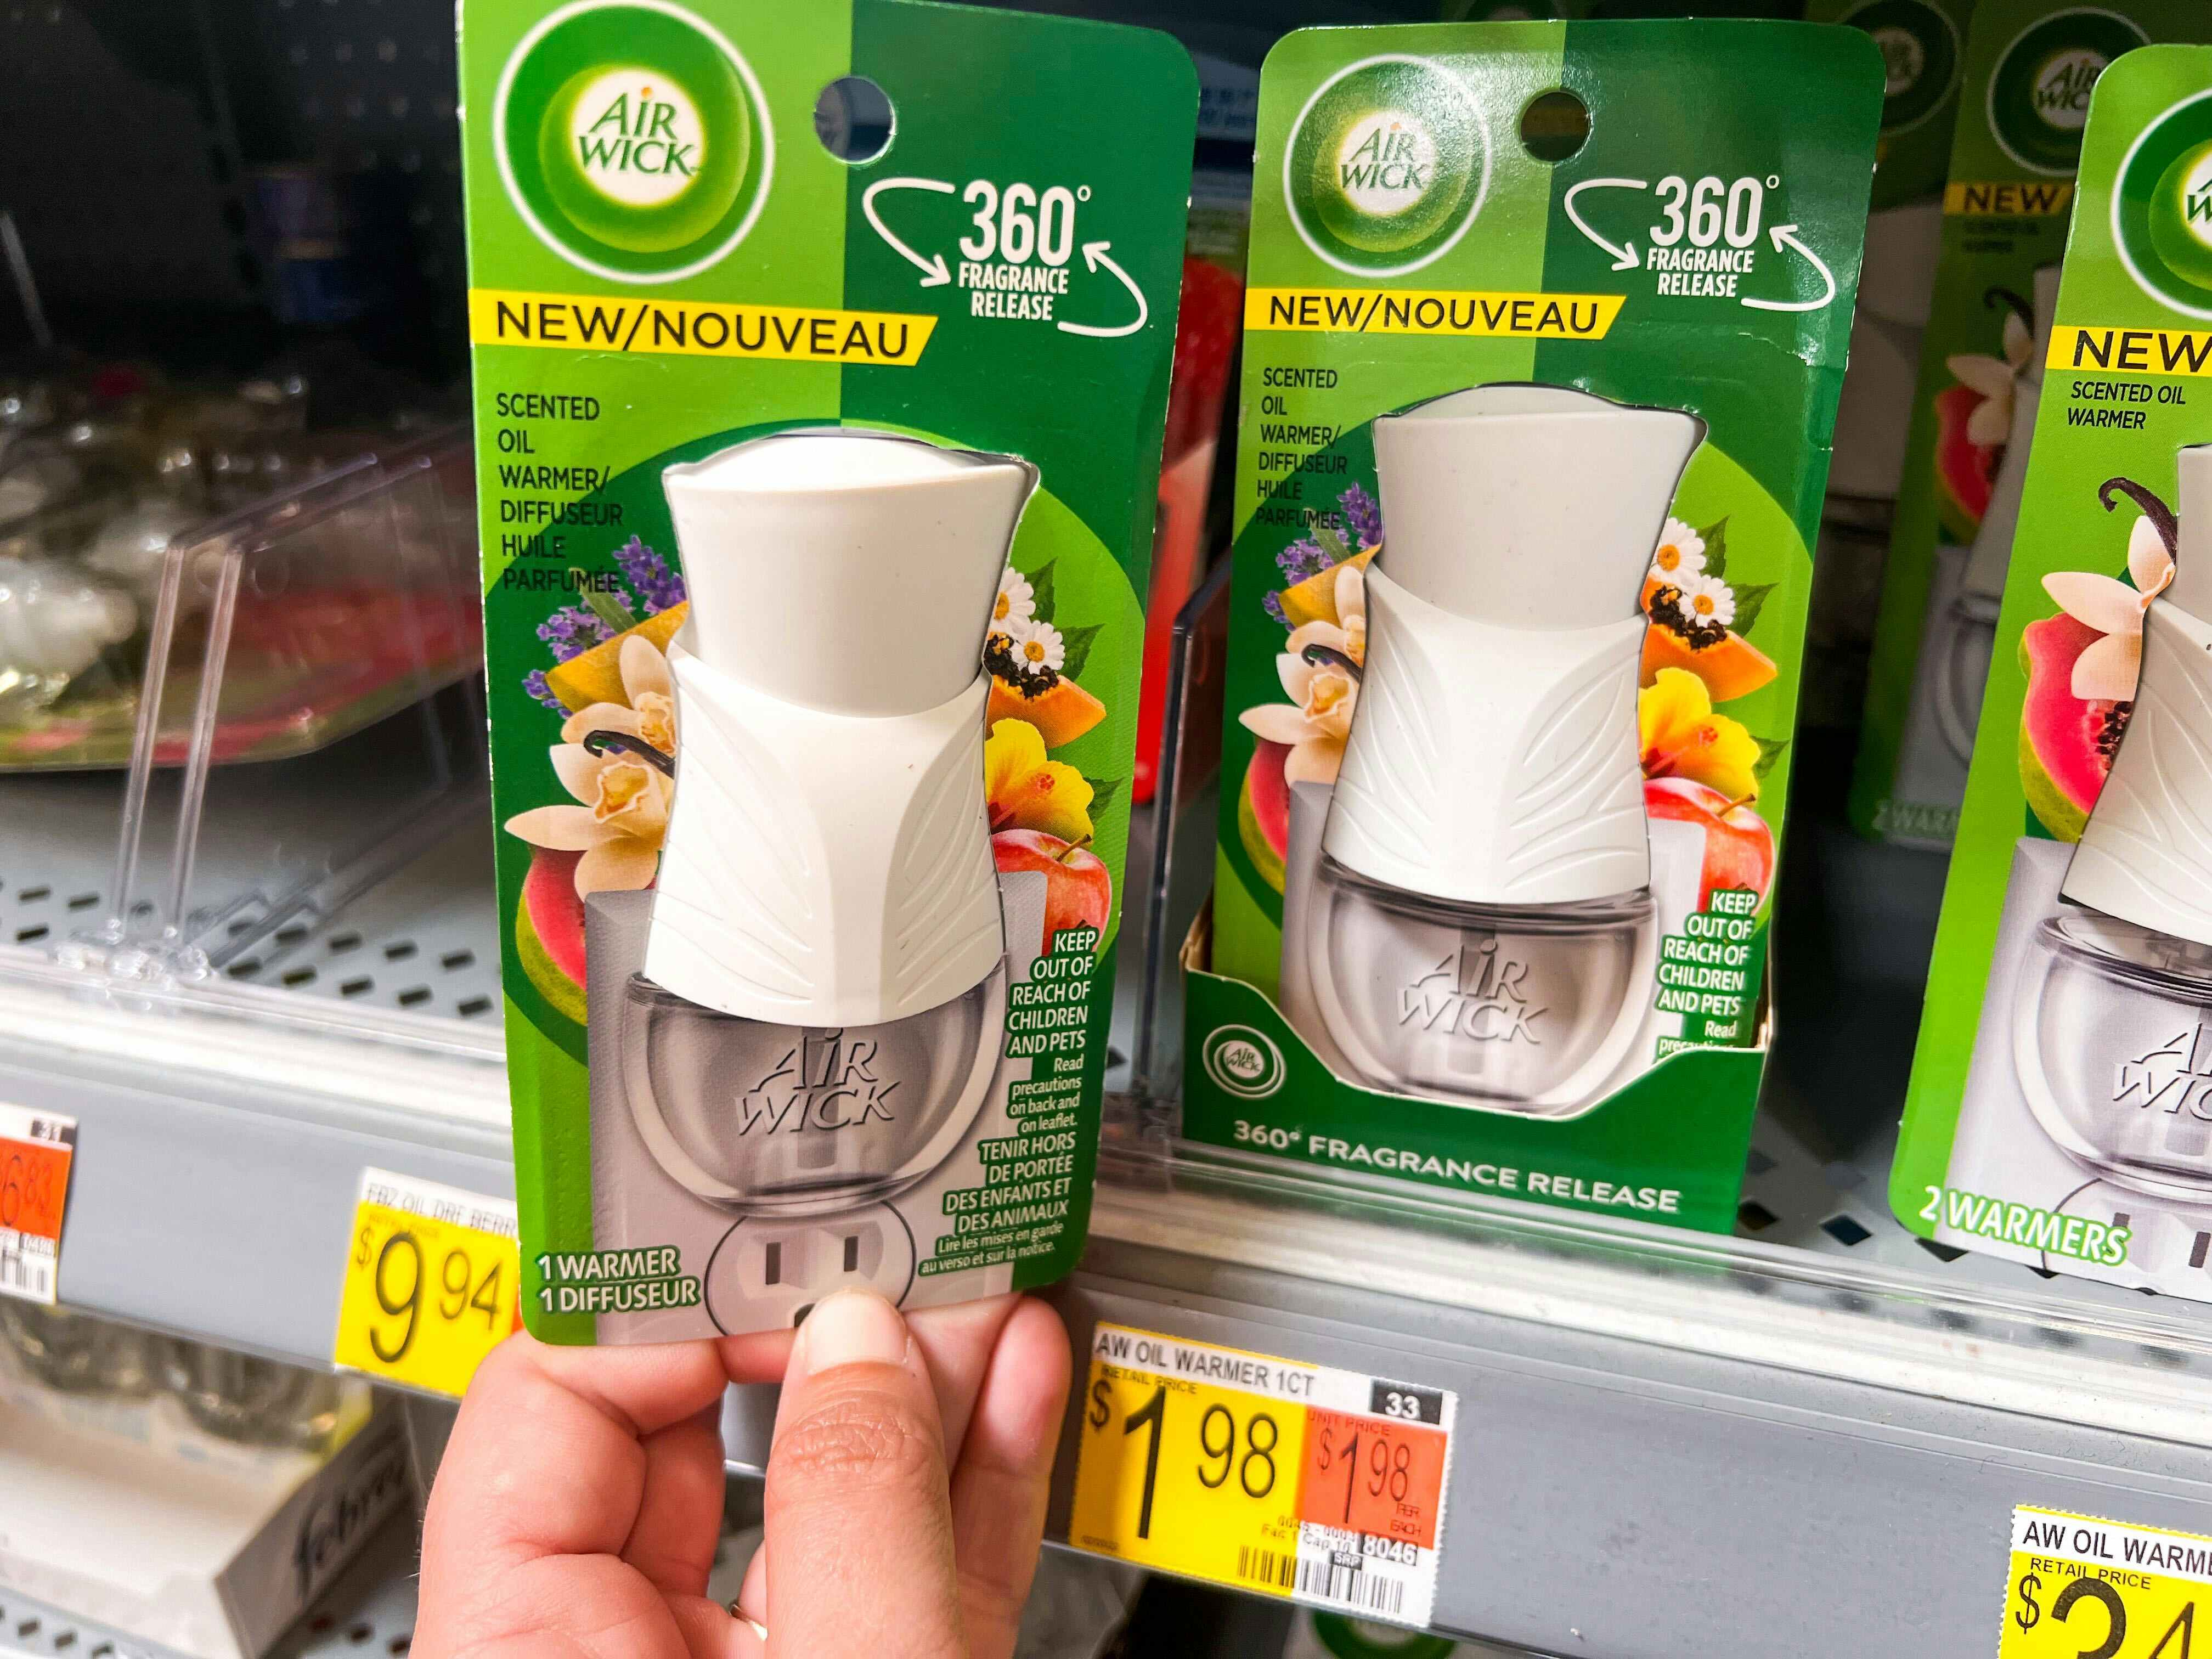 Air Wick Plug In Scented Oil Warmer held in front of shelf at Walmart. Price tag states that the price is $1.98.